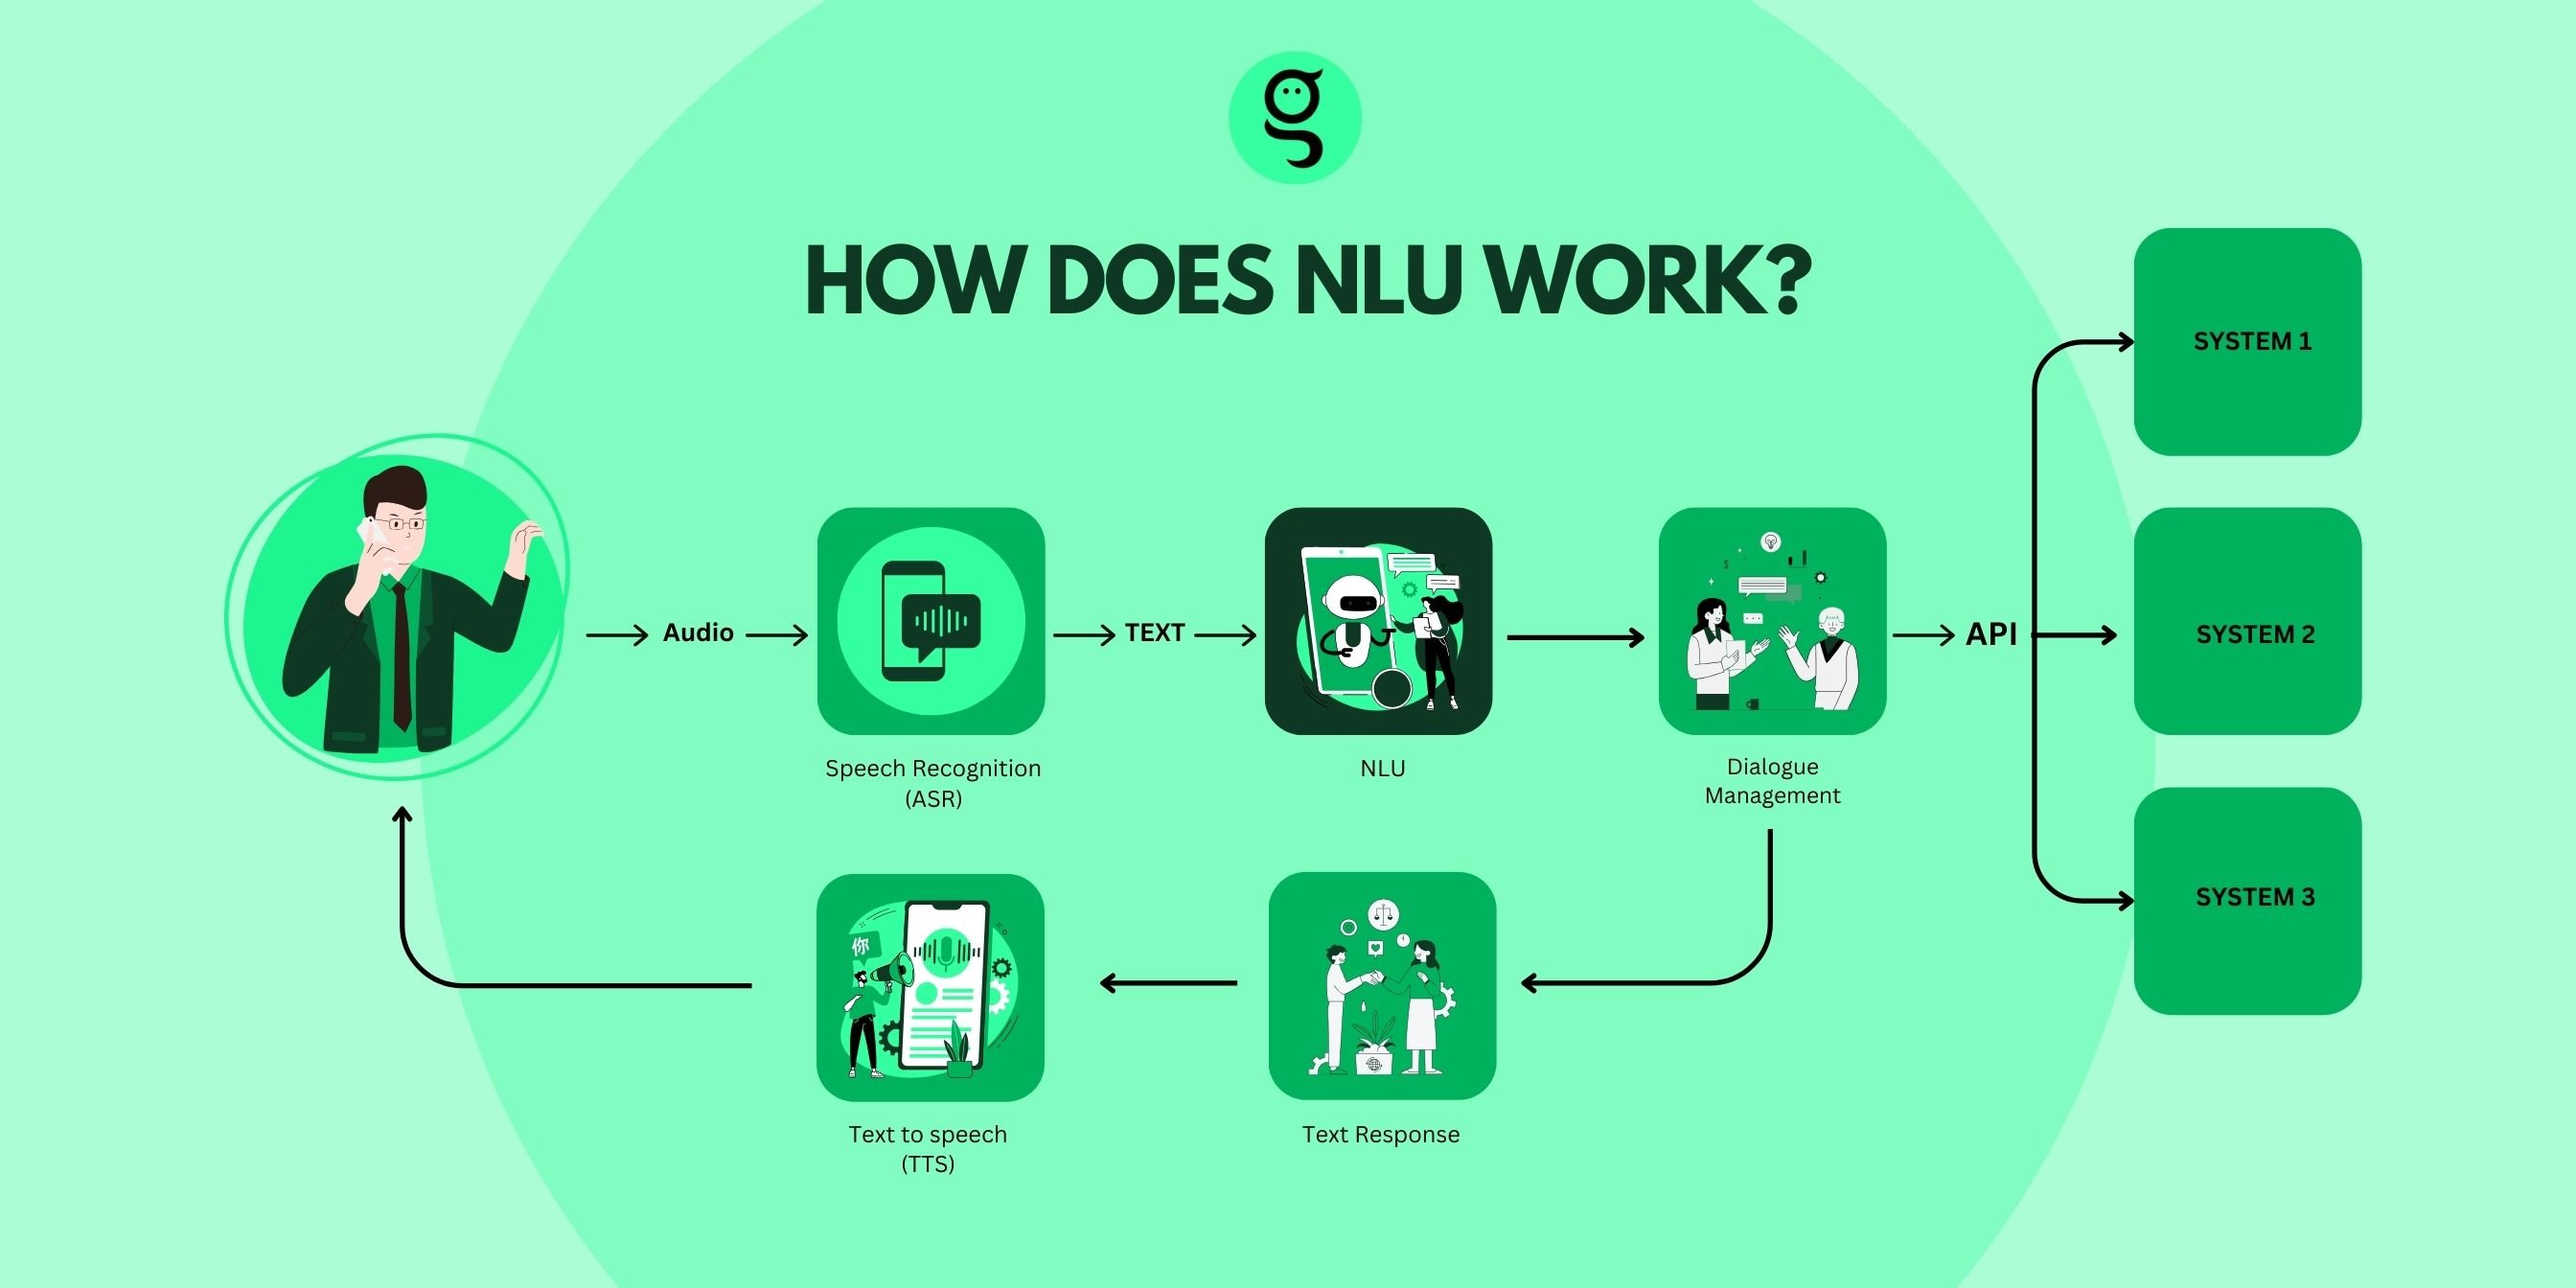 An overview of how NLU works in Conversational AI